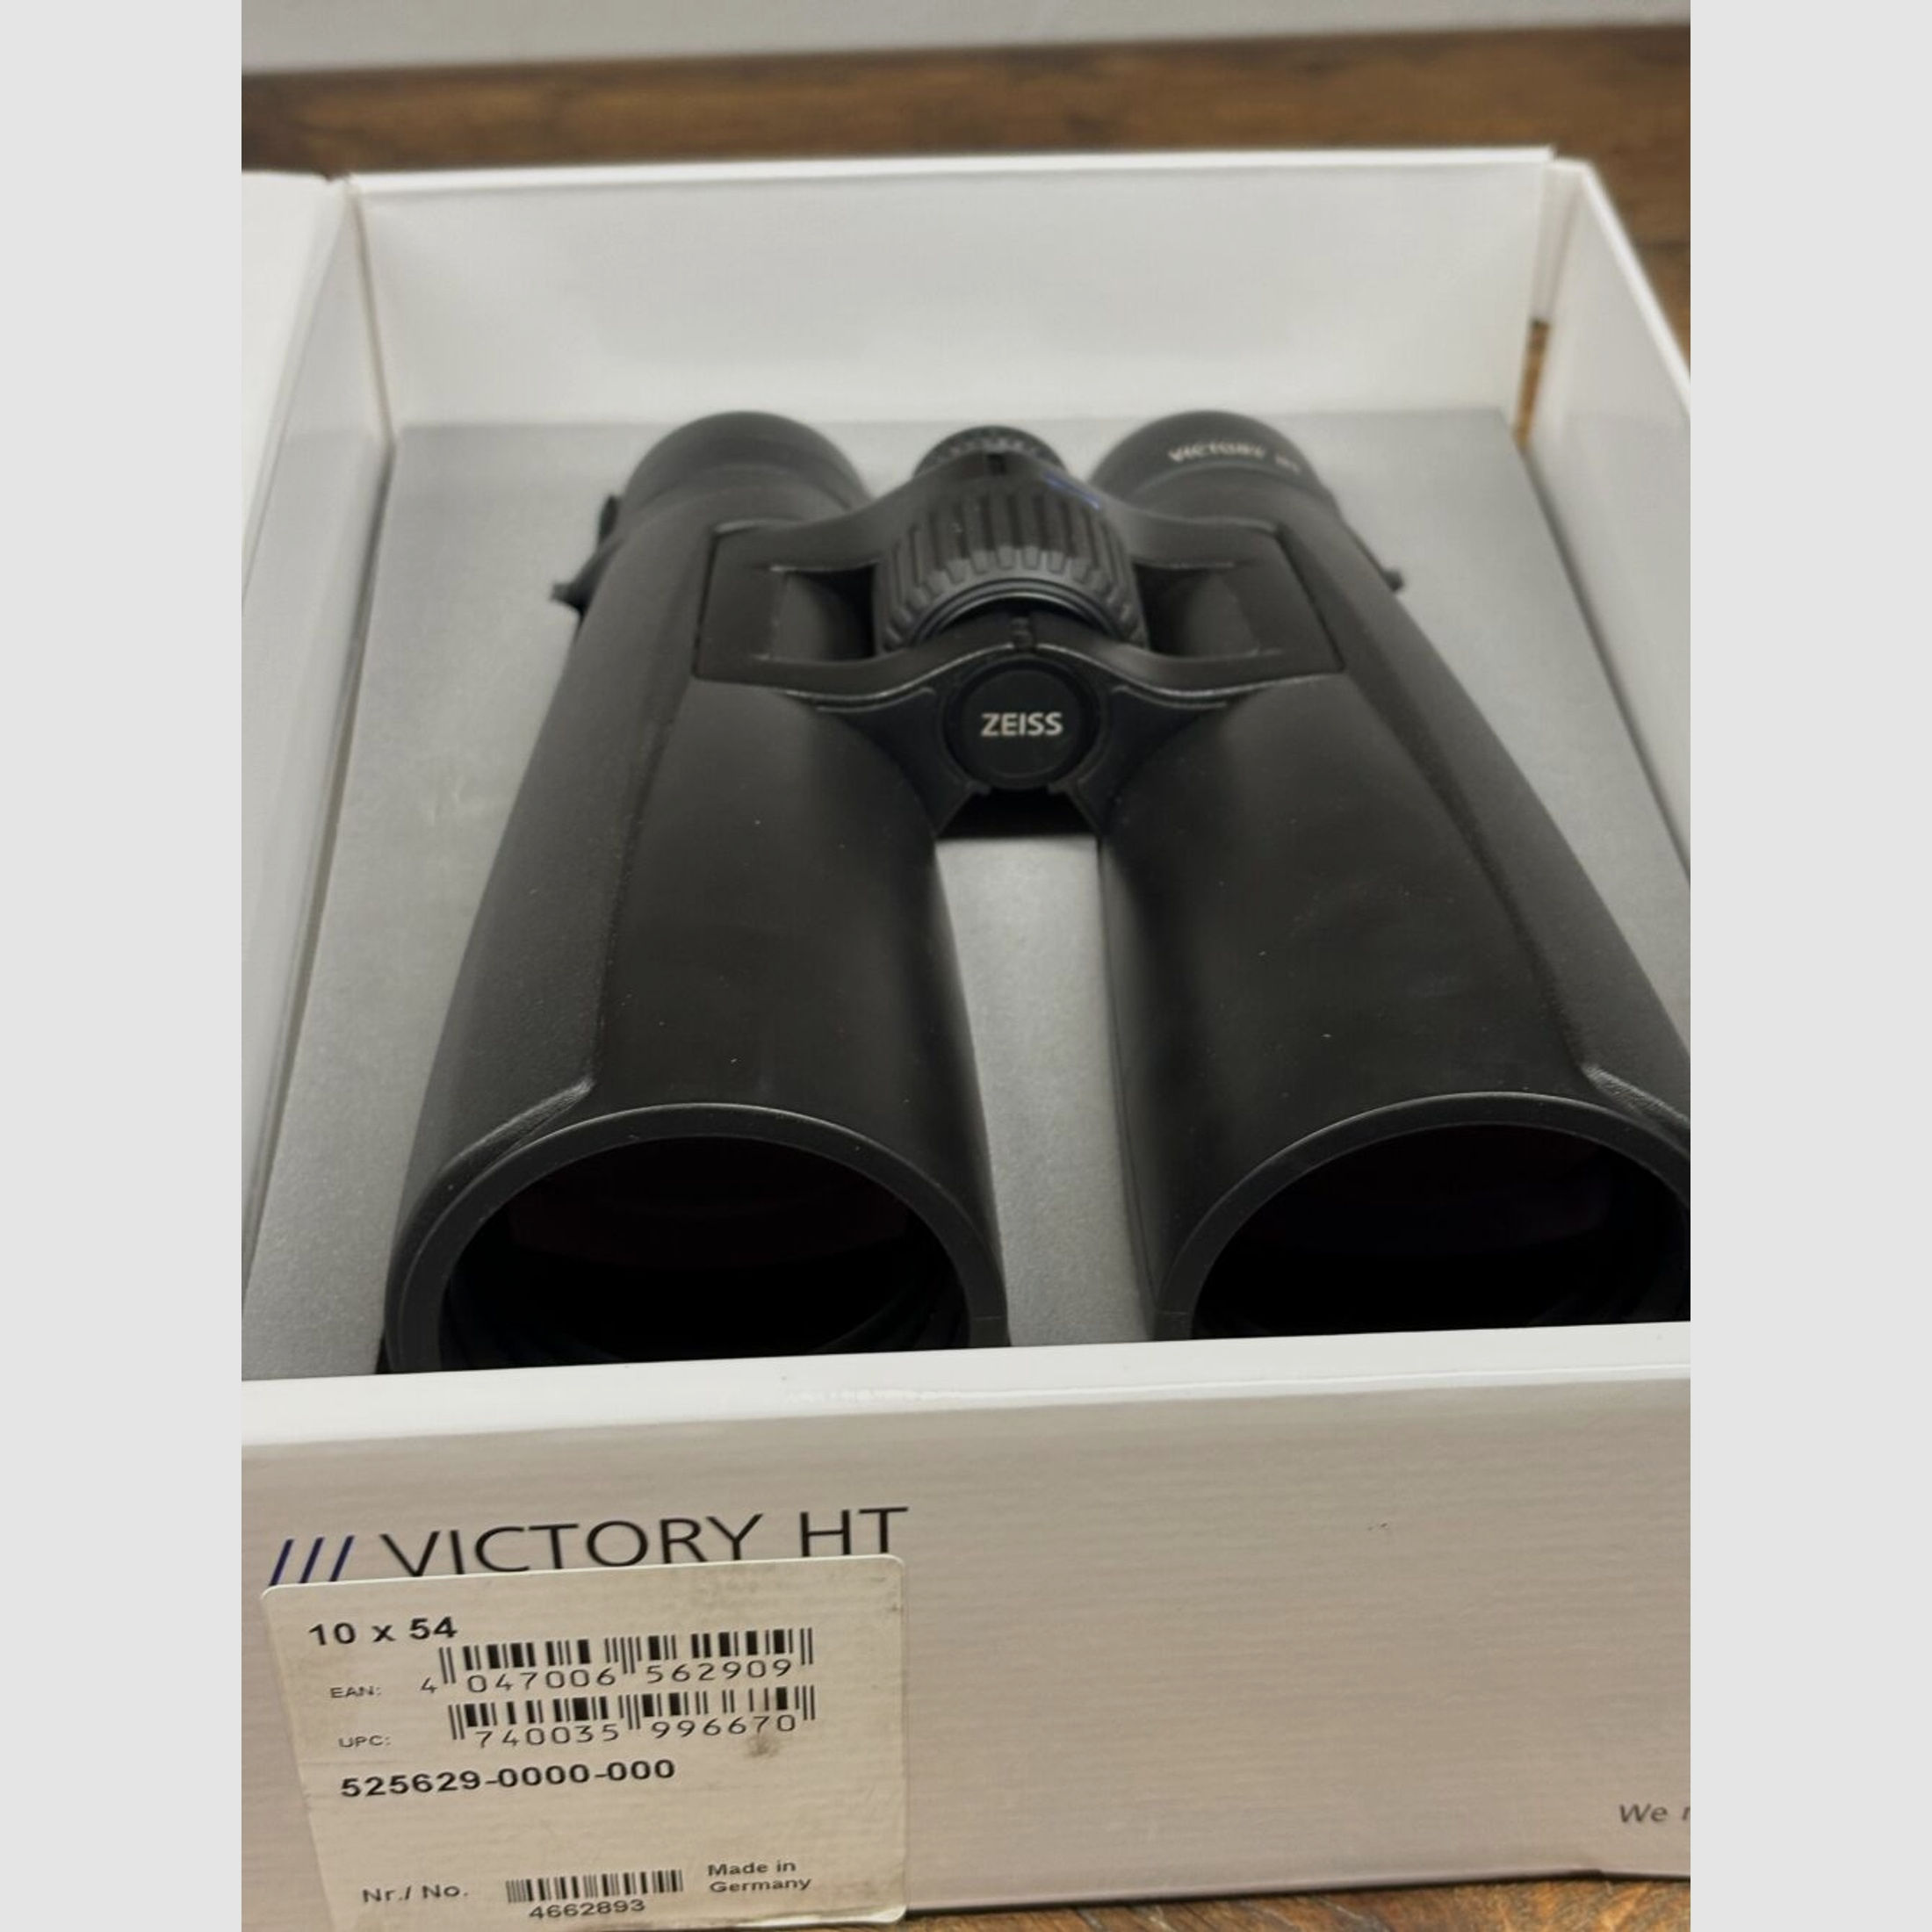 Zeiss	 Victory HT 10x54